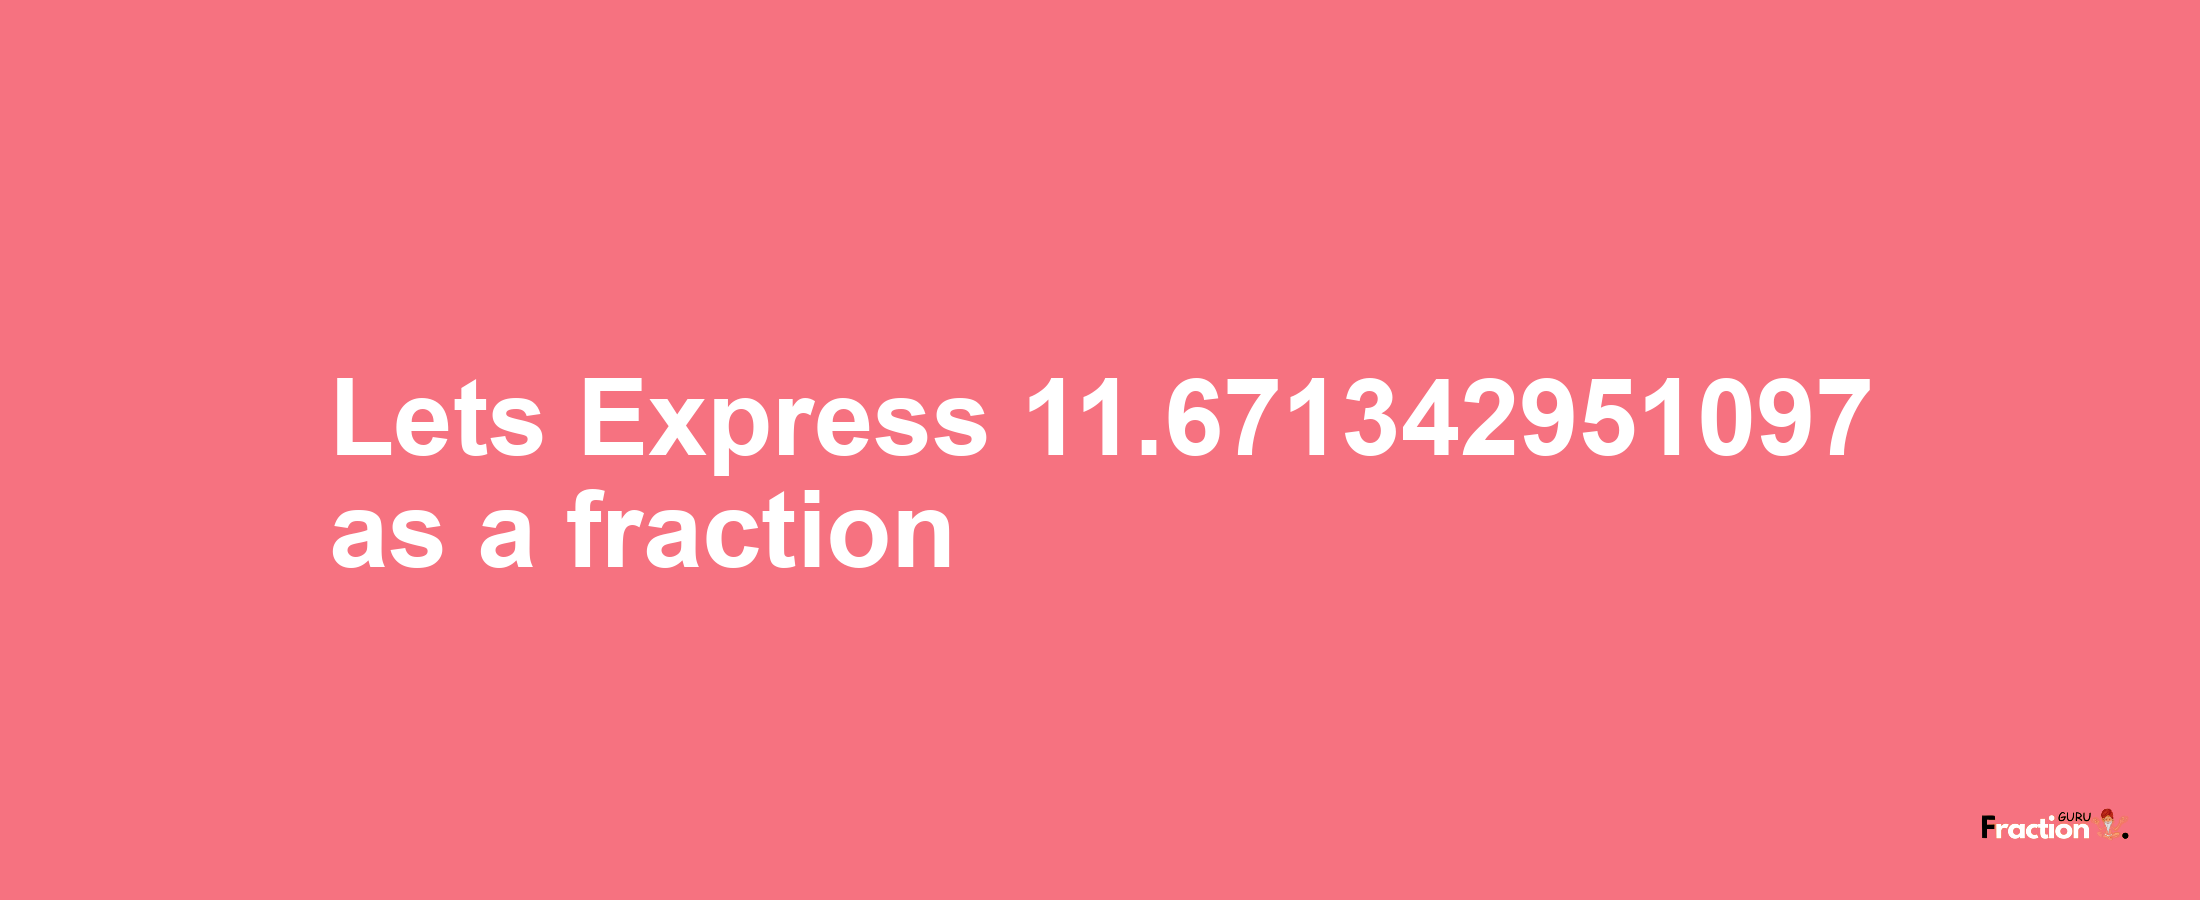 Lets Express 11.671342951097 as afraction